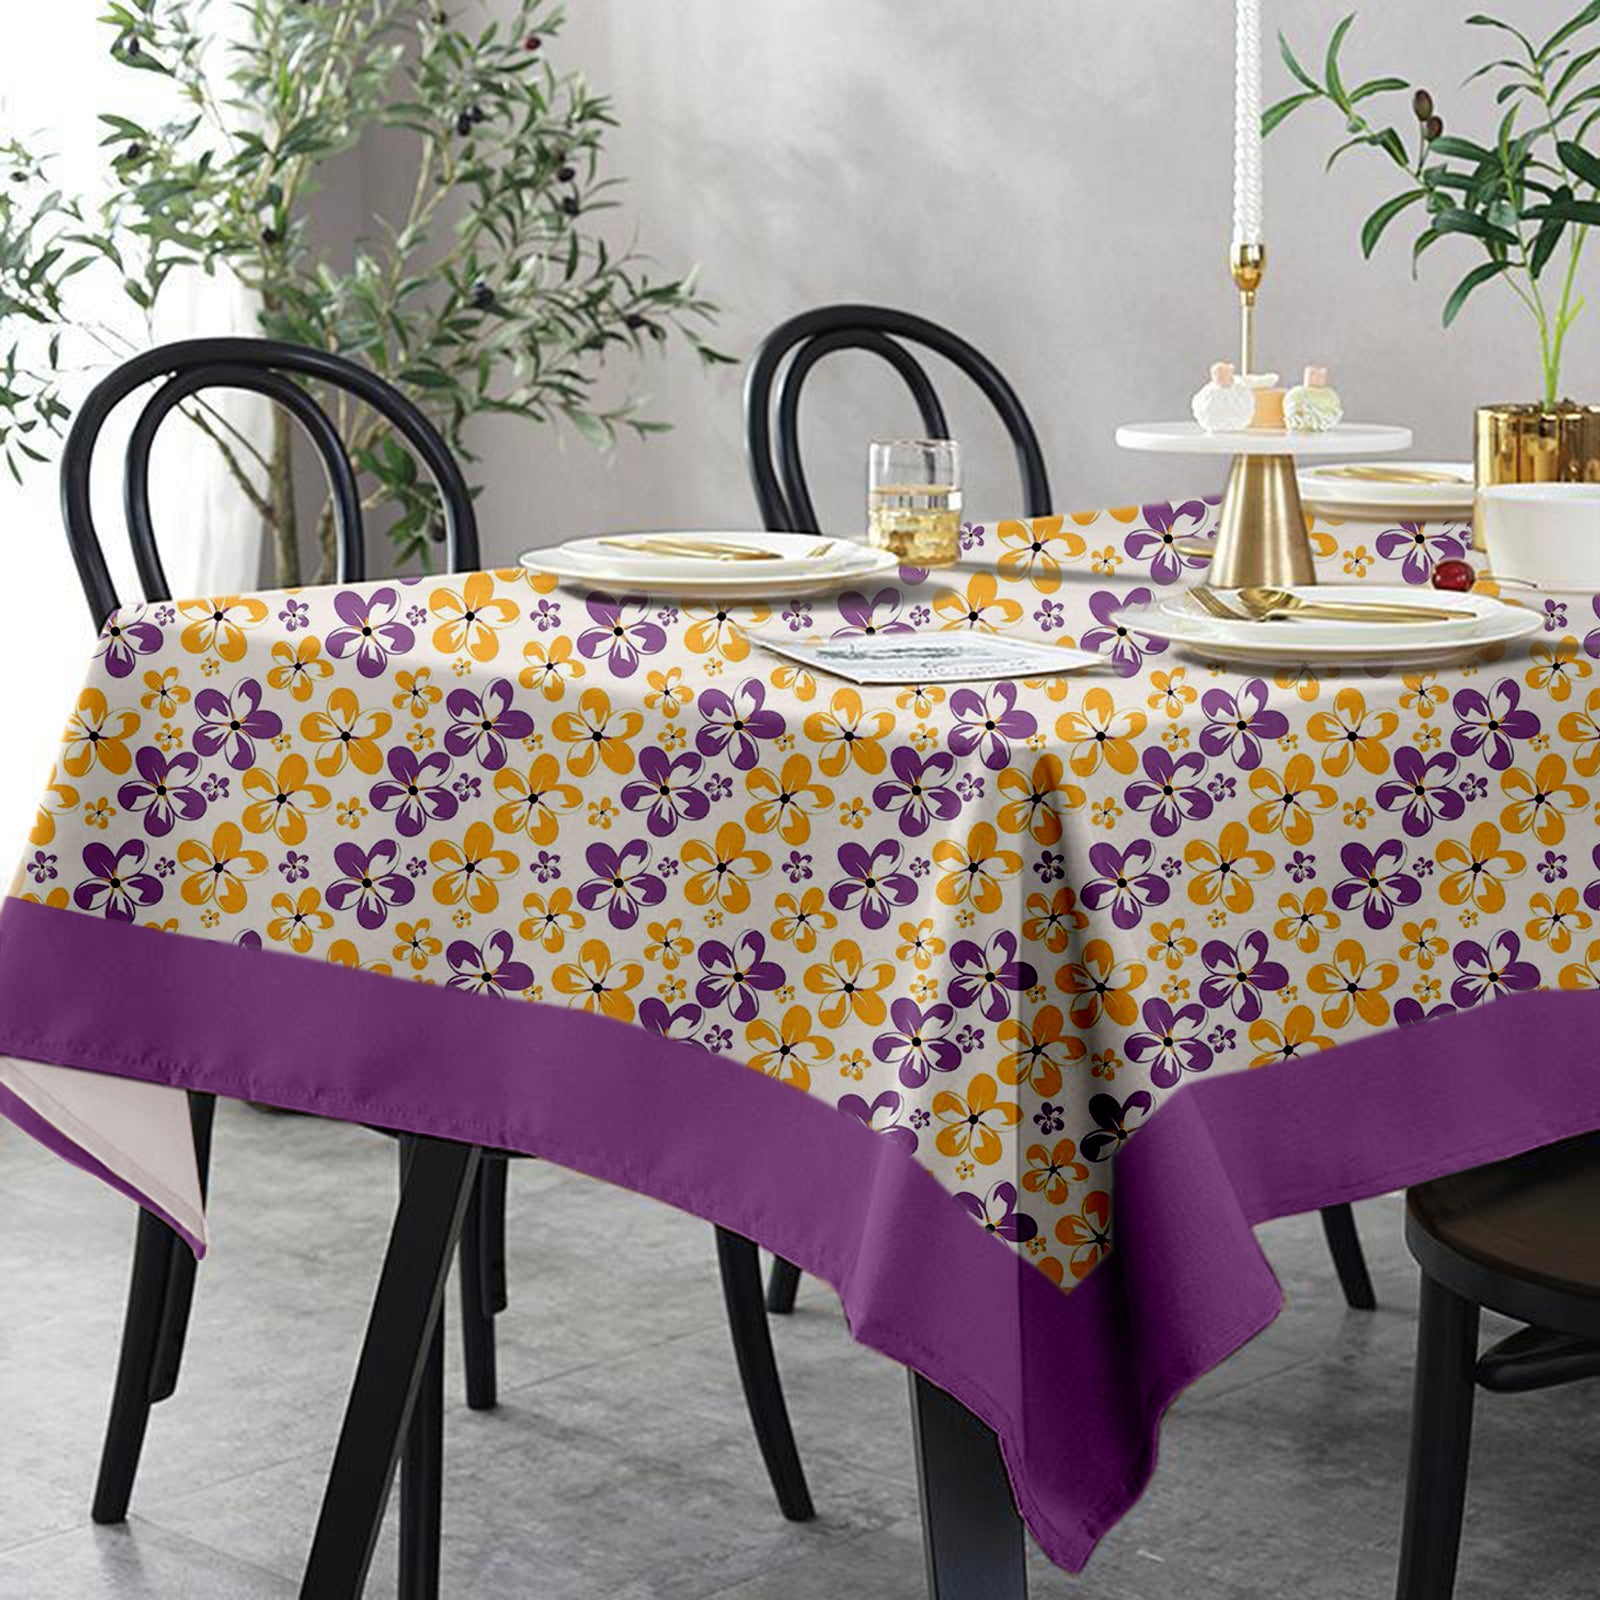 Lushomes dining table cover 4 Seater, Shadow Printed Dining Table Cover Cloth Linen, Home Decor Items, , table cloth, table cover, dinning table cover (Pack of 1, 60 x 60 inches)